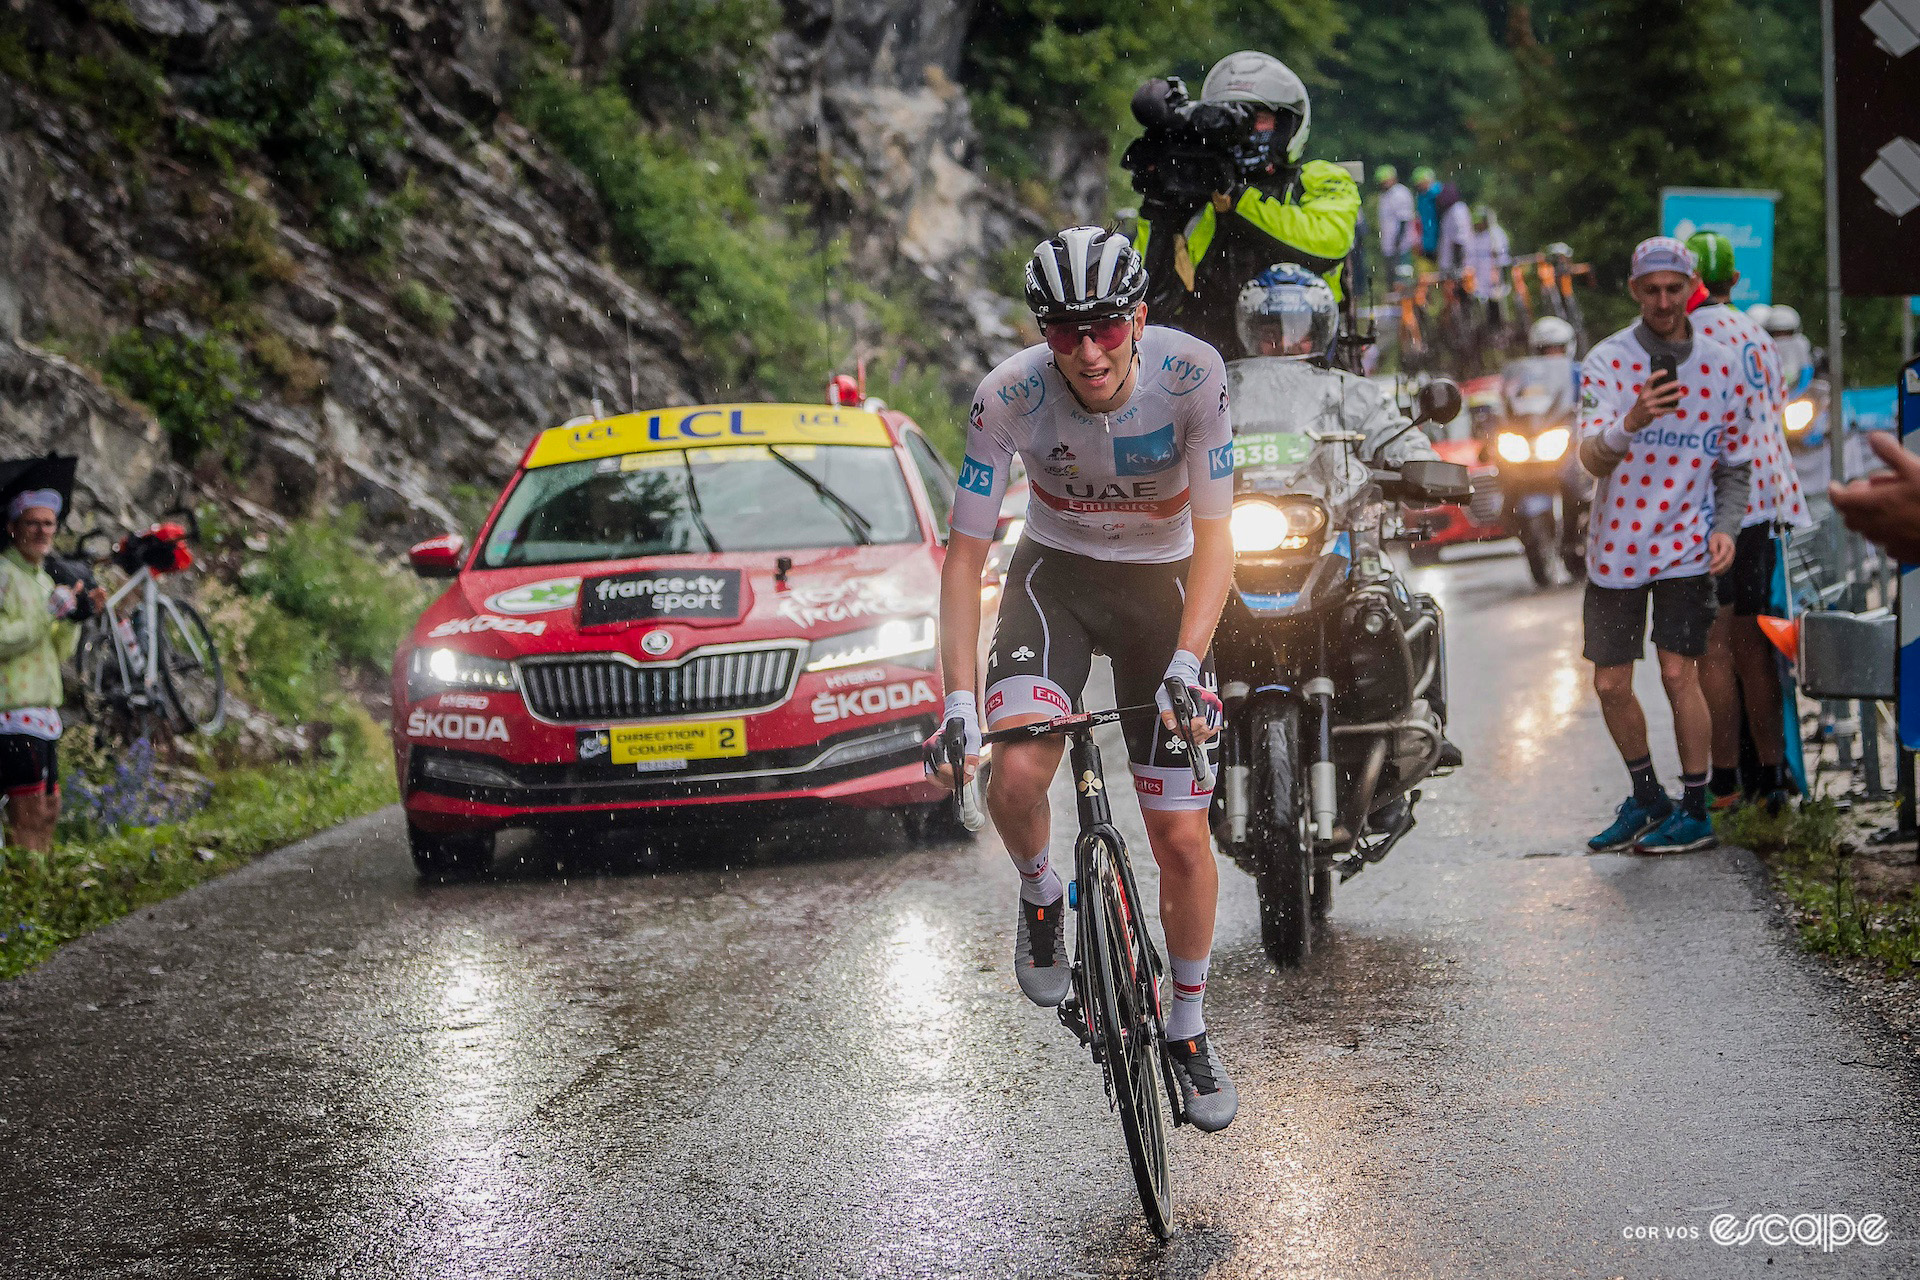 Tadej Pogačar in the white jersey of best young rider soaked through in the rain during stage 8 of the 2021 Tour de France.